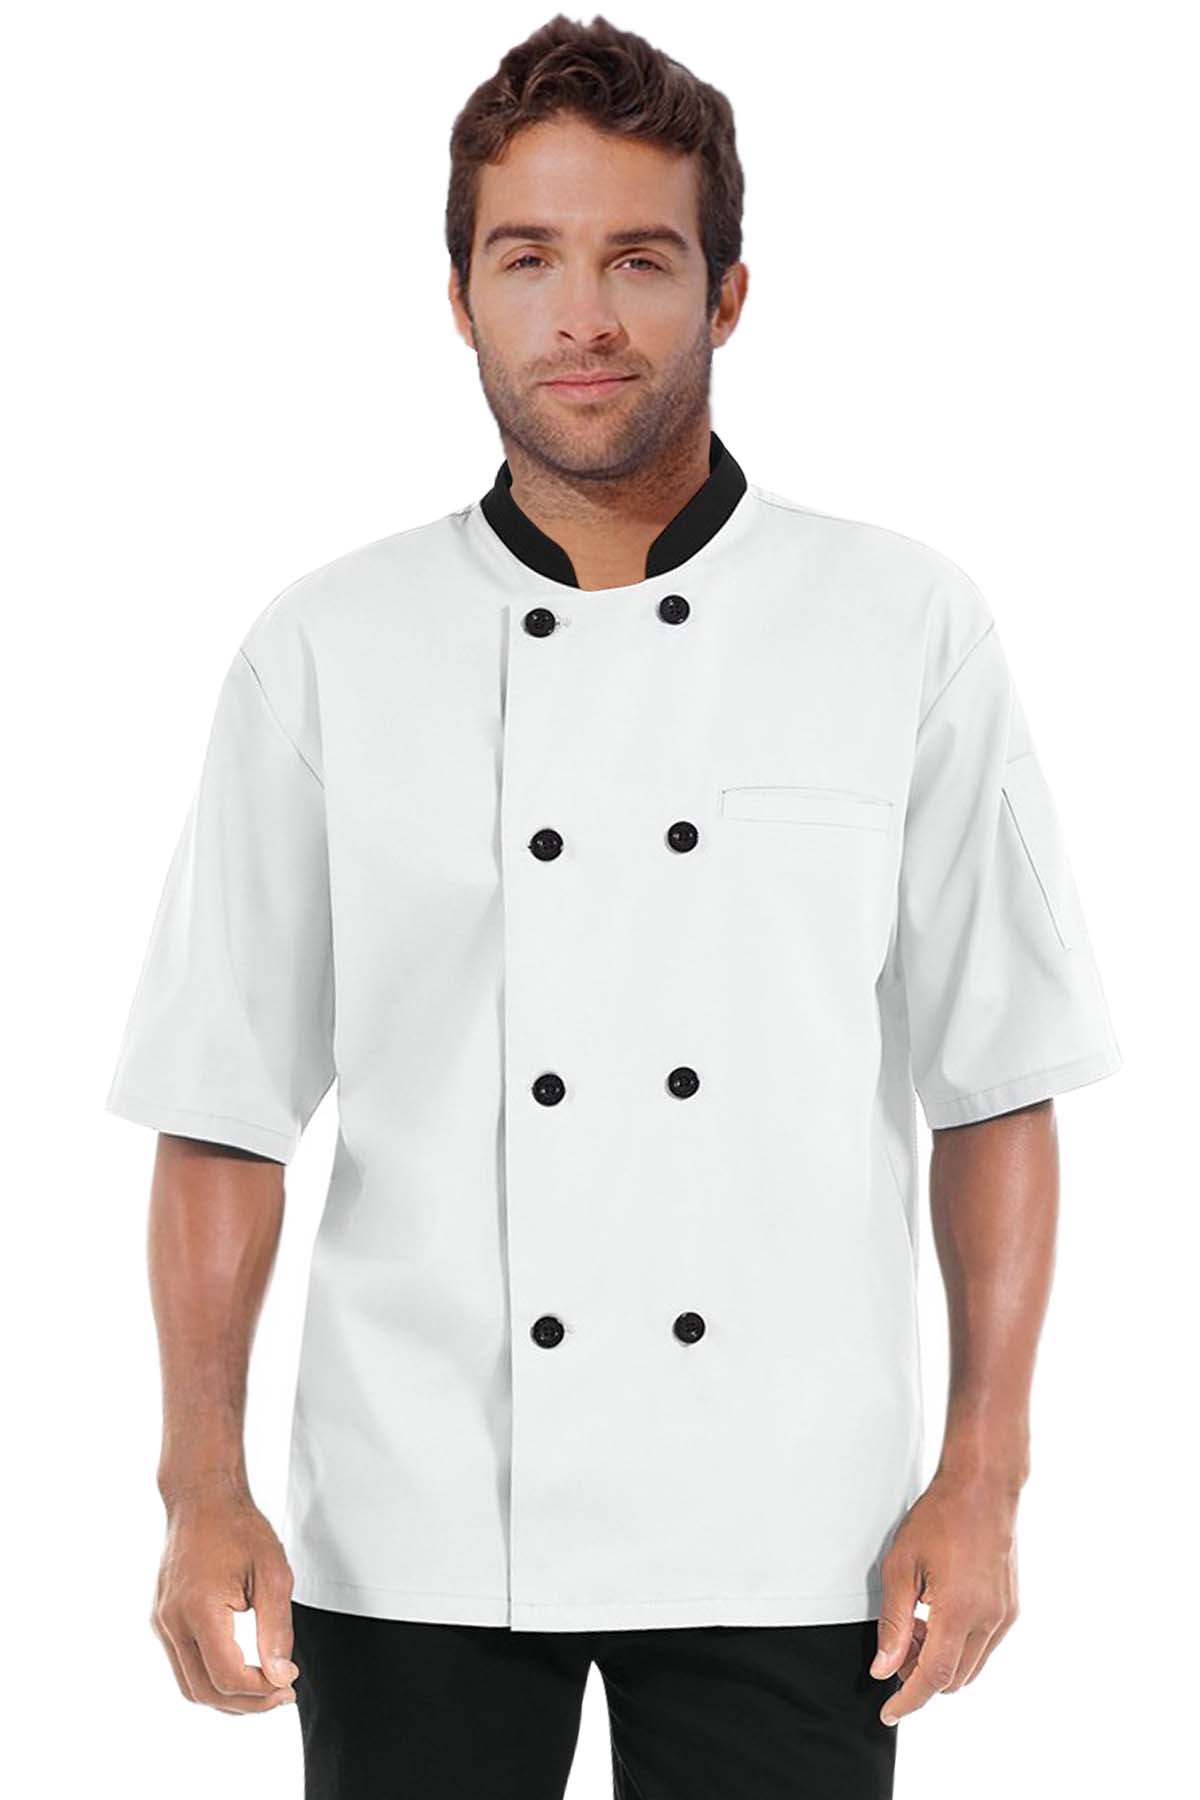 Chef Coat Unisex in Canvas Fabric (5 OZ) Half Sleeve With 1 Chest pocket and 1 Sleeve Pocket in Black Collar and Button Front Closure